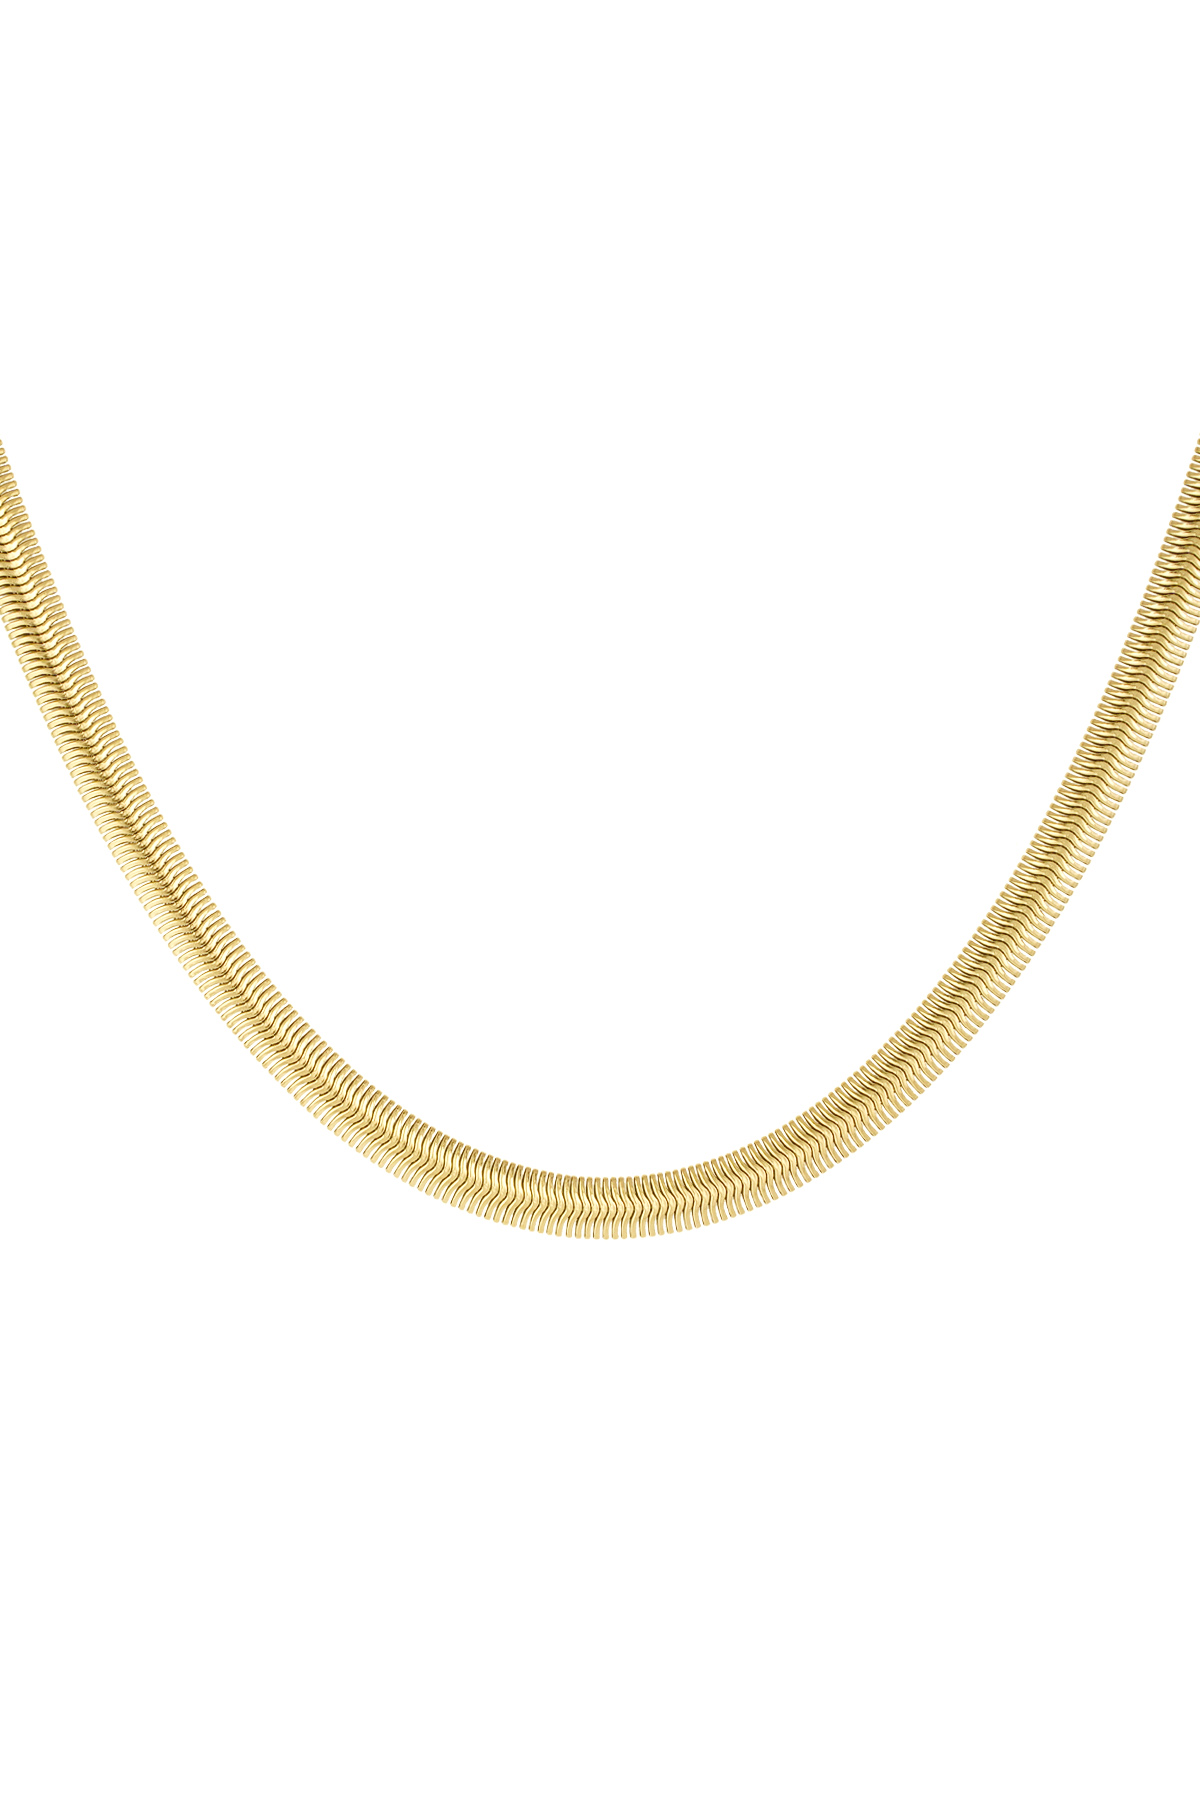 Necklace flat with print - gold-6.0MM